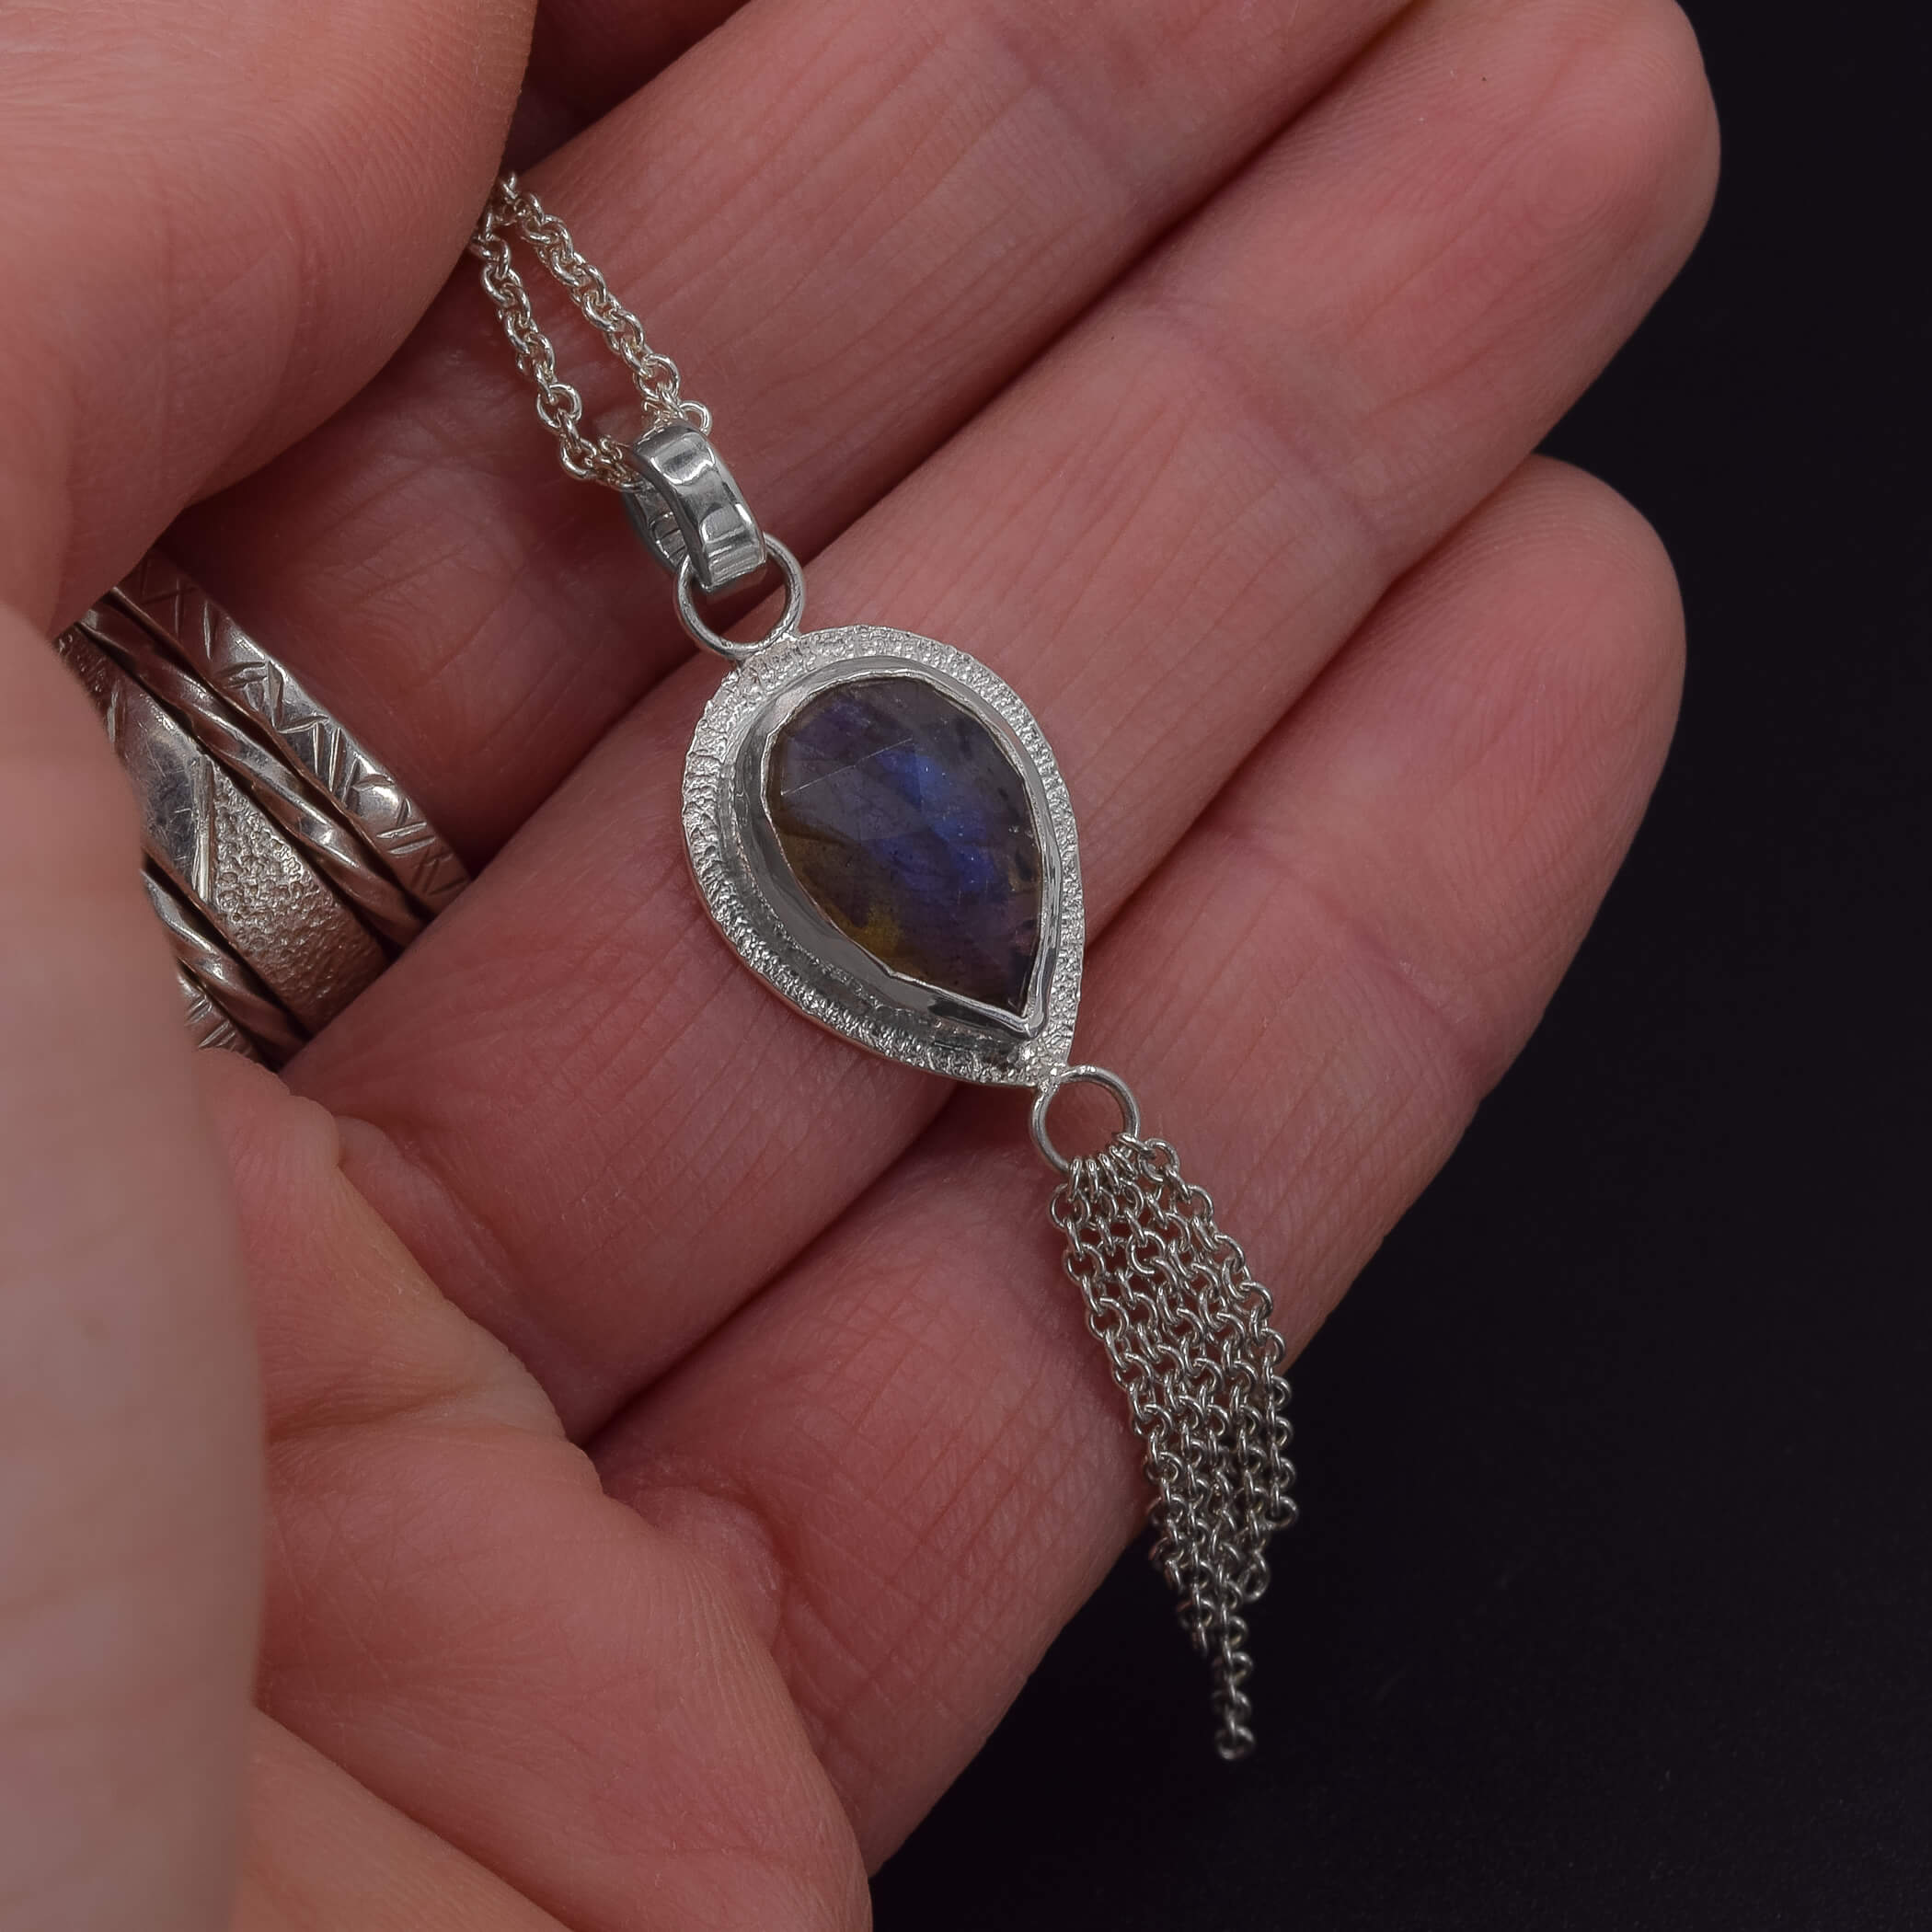 Teardrop labradorite set in sterling silver with a dainty chain embellishment hanging at the bottomTeardrop labradorite set in sterling silver with a dainty chain embellishment hanging at the bottom shown in hand for scale